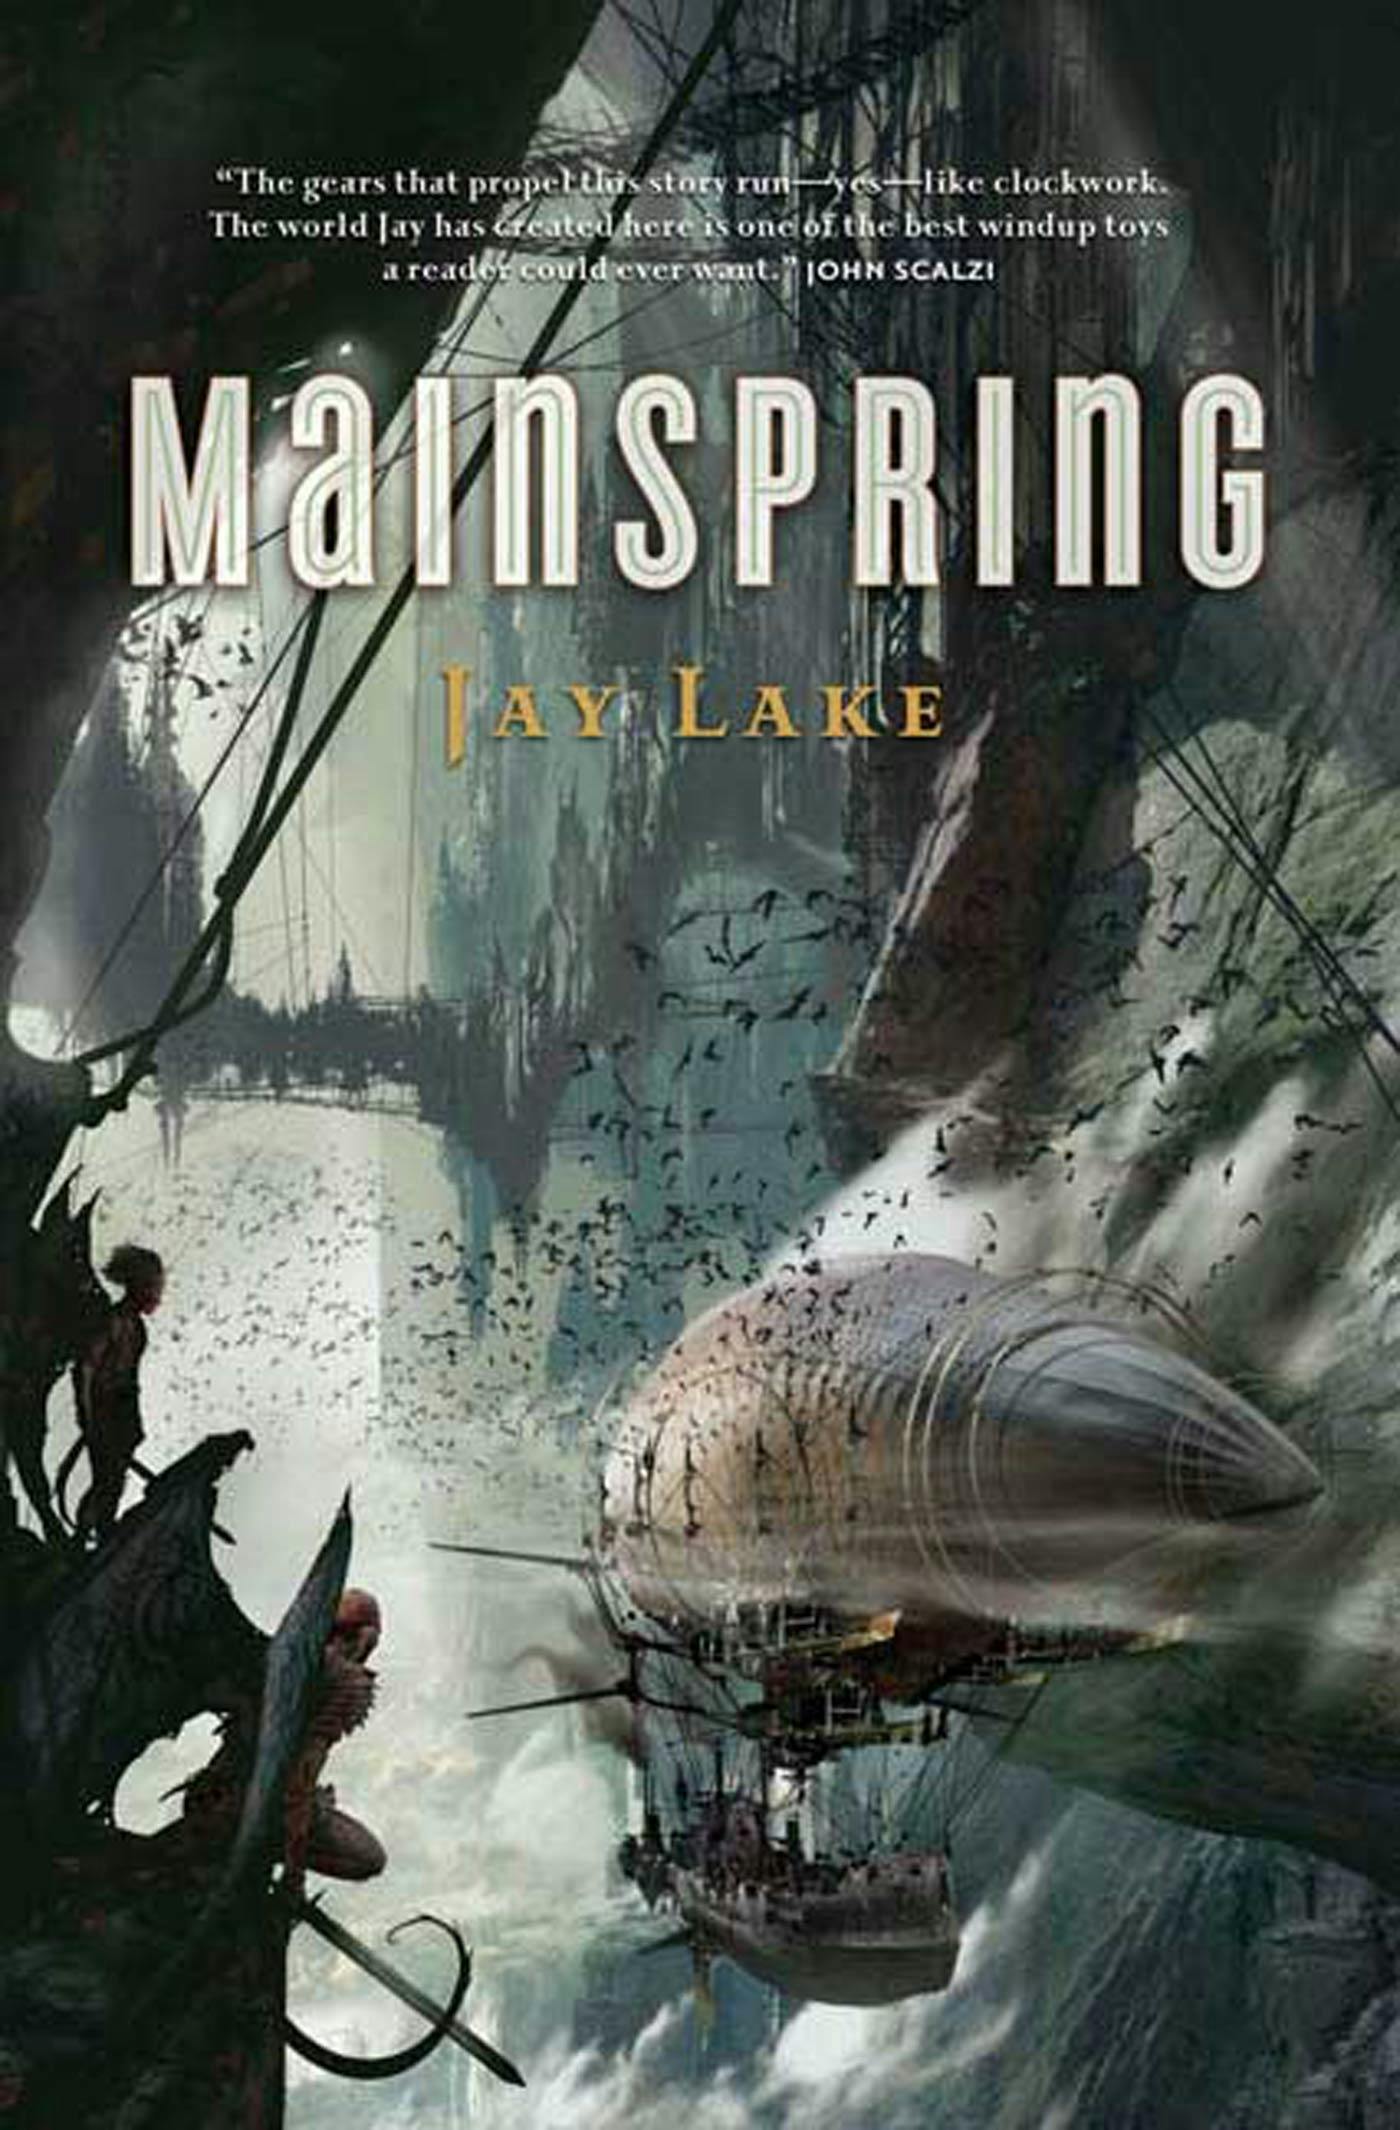 Cover for the book titled as: Mainspring